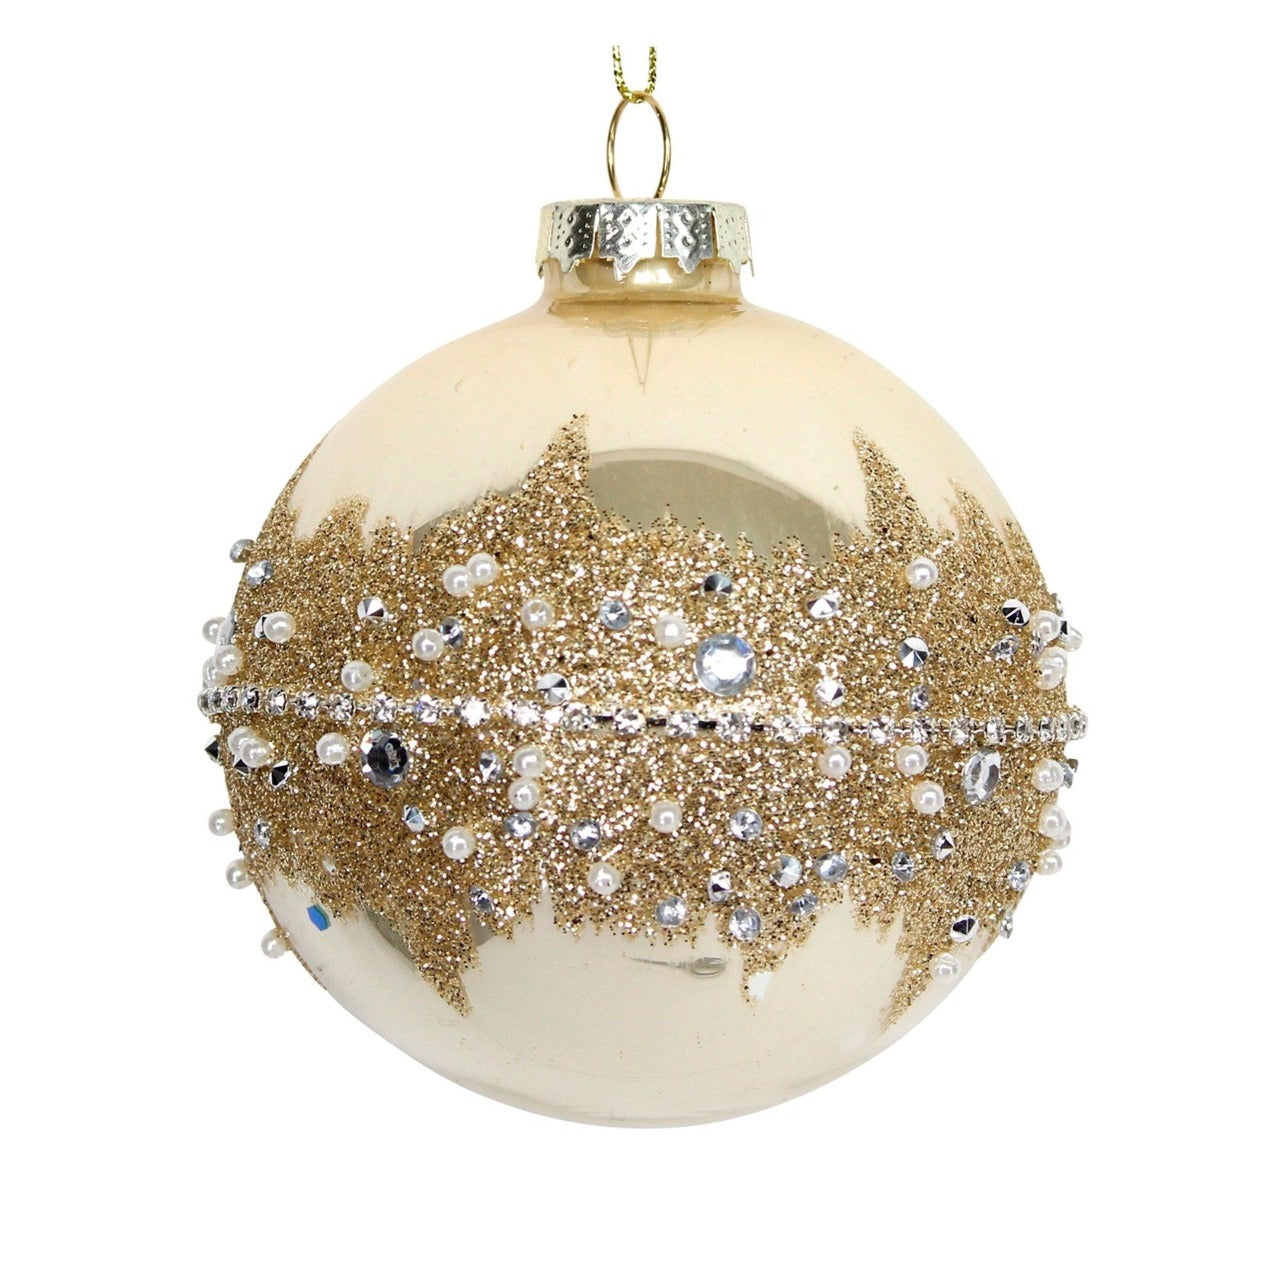 Gisela Graham Christmas Bauble Gold With Diamante Glitter Band  Browse our beautiful range of luxury Christmas tree decorations, baubles & ornaments for your tree this Christmas.  Add style to your Christmas tree with these elegant Christmas gold glass baubles decorated with diamante and glitter band.